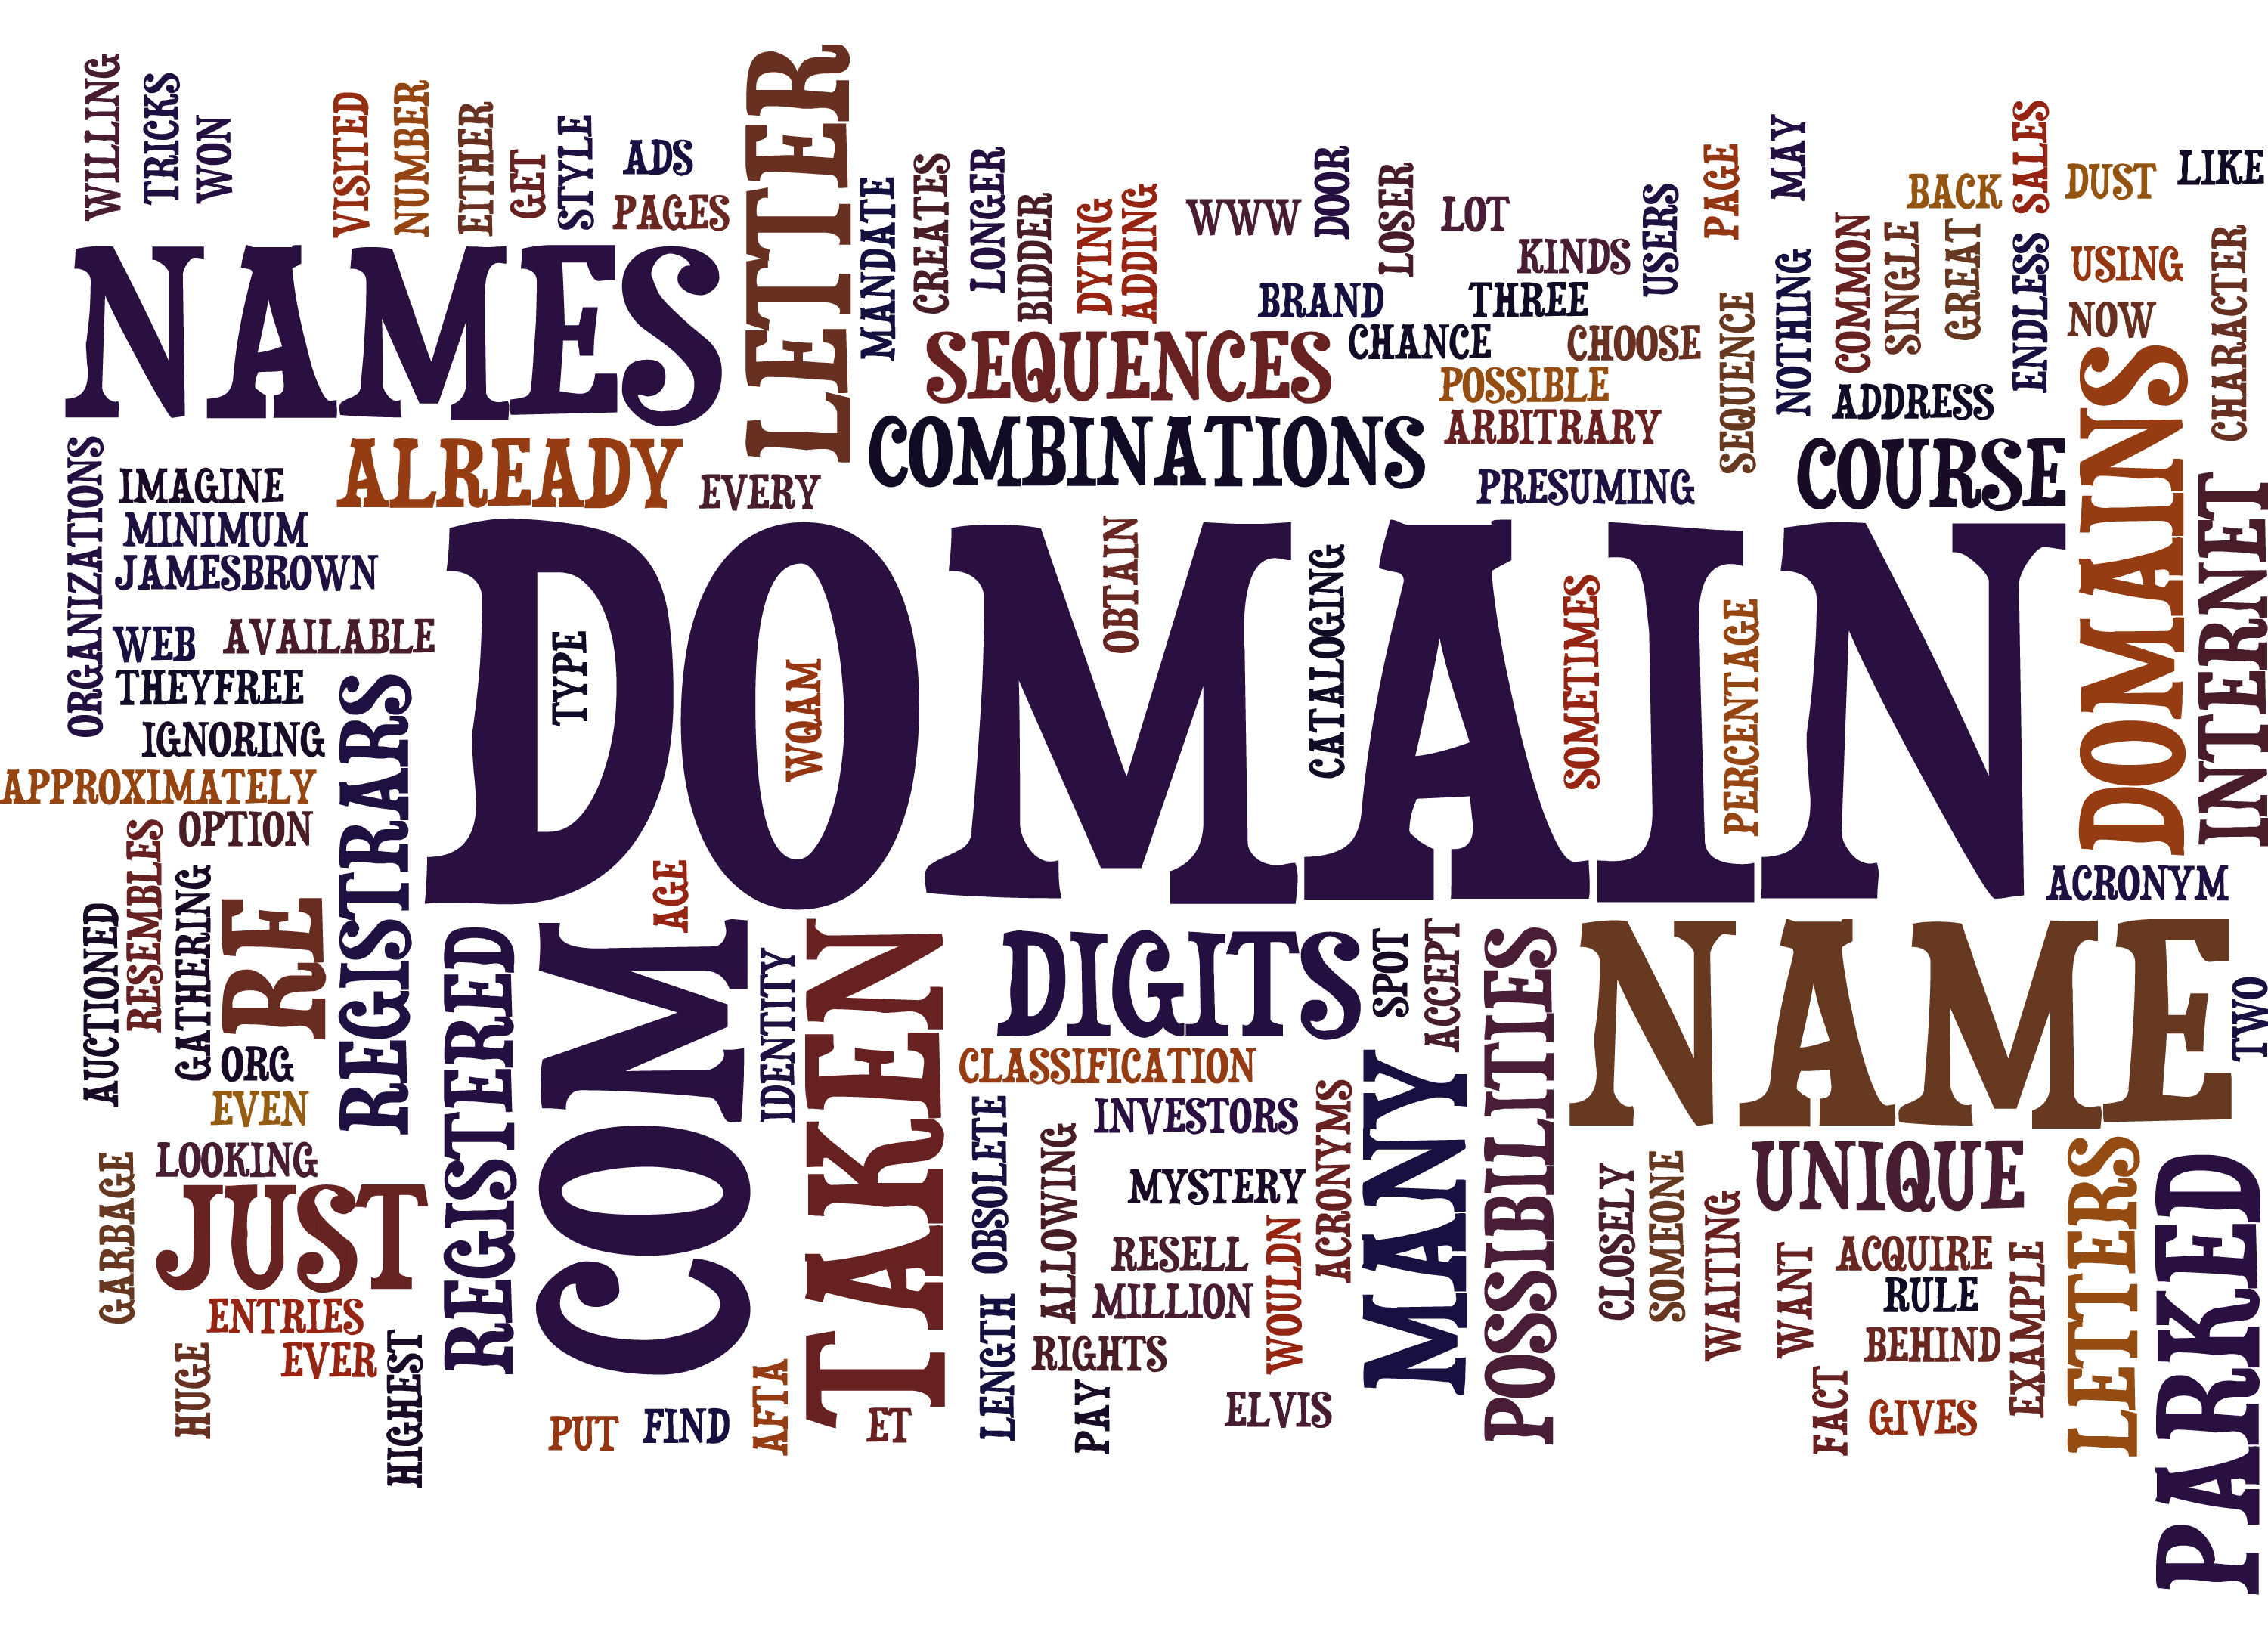 Can a domain extension be good for a company without being good for Domainers too? I say yes.